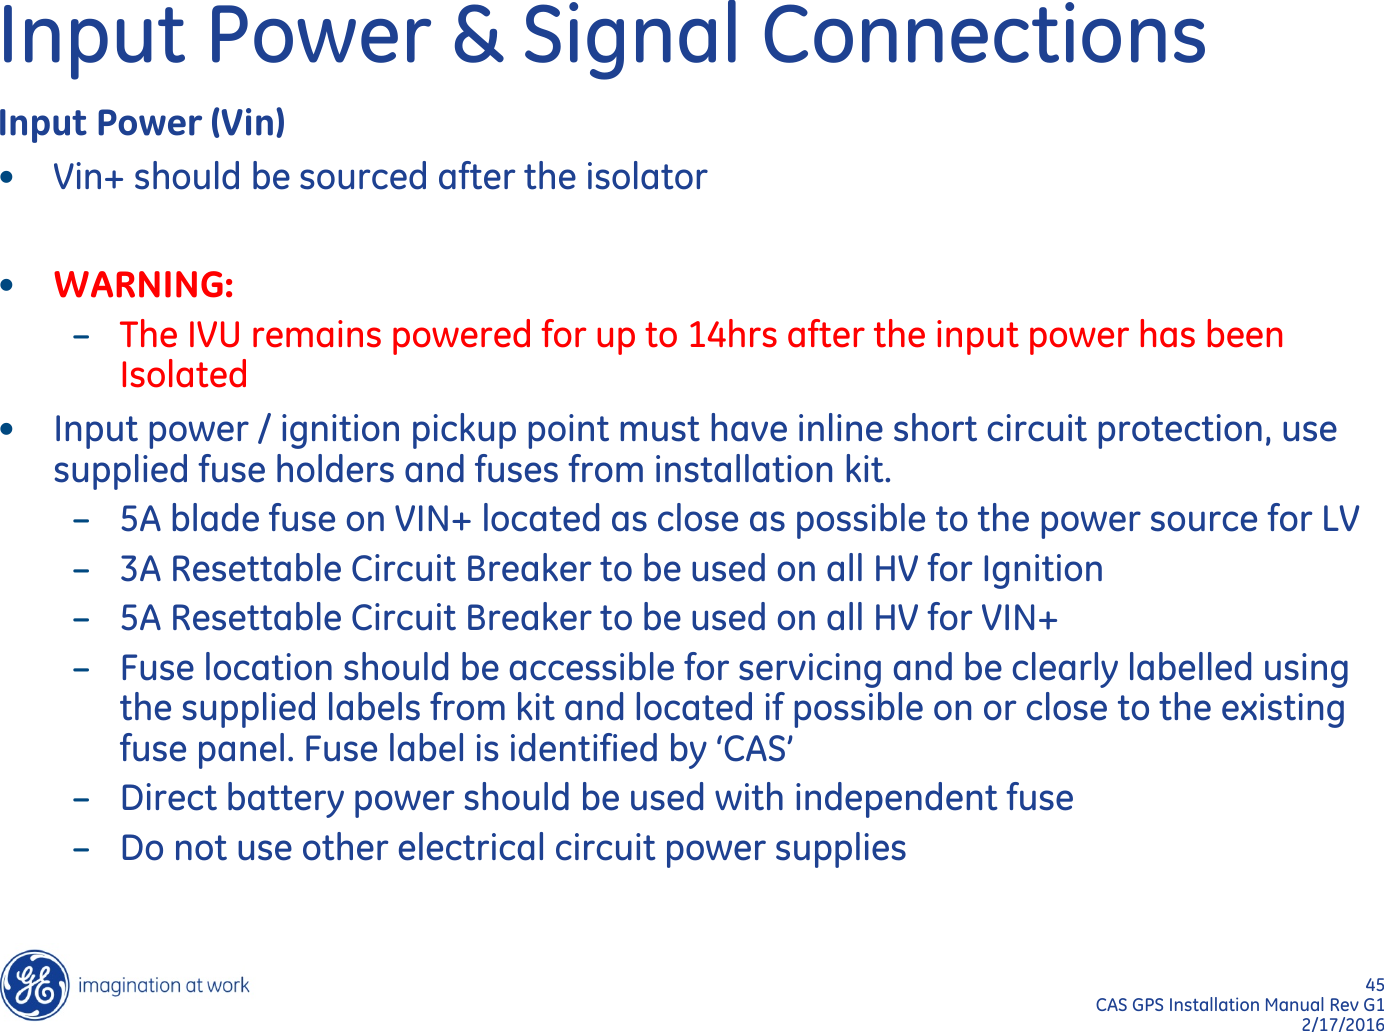 45  CAS GPS Installation Manual Rev G1 2/17/2016 Input Power &amp; Signal Connections Input Power (Vin) •Vin+ should be sourced after the isolator  •WARNING: –The IVU remains powered for up to 14hrs after the input power has been Isolated •Input power / ignition pickup point must have inline short circuit protection, use supplied fuse holders and fuses from installation kit. –5A blade fuse on VIN+ located as close as possible to the power source for LV –3A Resettable Circuit Breaker to be used on all HV for Ignition –5A Resettable Circuit Breaker to be used on all HV for VIN+ –Fuse location should be accessible for servicing and be clearly labelled using the supplied labels from kit and located if possible on or close to the existing fuse panel. Fuse label is identified by ‘CAS’ –Direct battery power should be used with independent fuse –Do not use other electrical circuit power supplies 